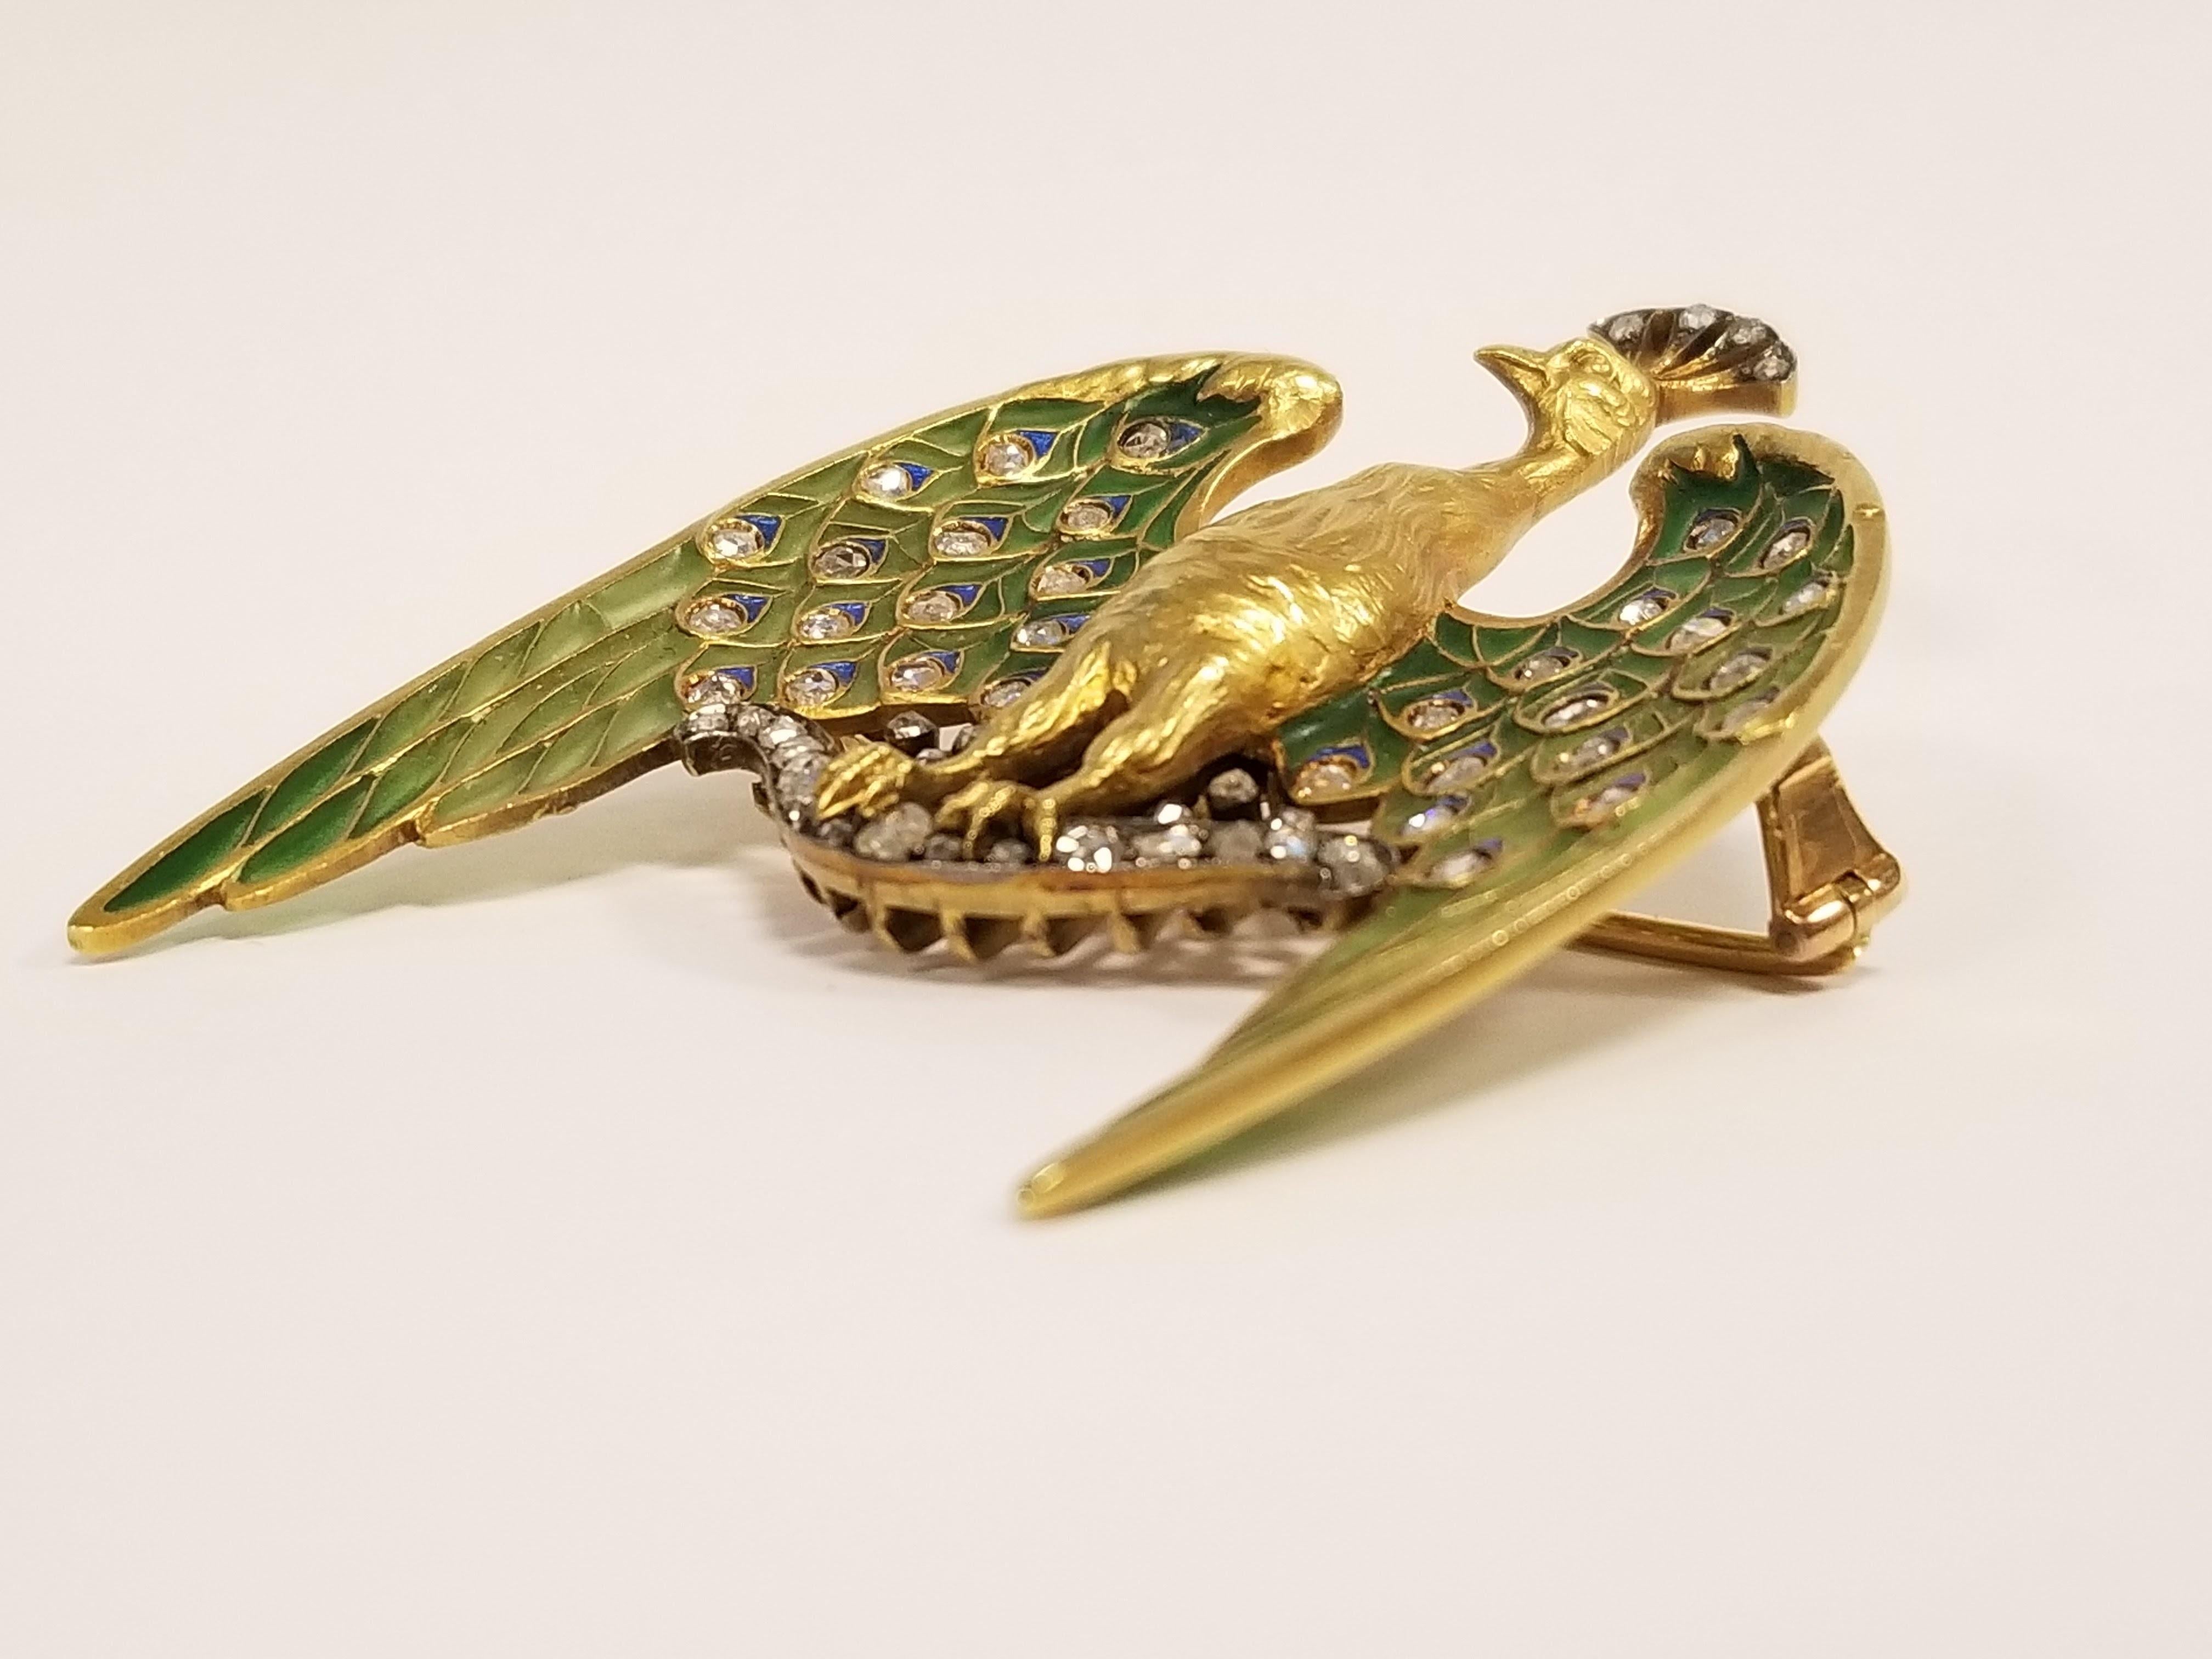 A French Art Nouveau 18 karat gold, silver and plique a jour enamel peacock brooch pendant with diamonds by Lucien Gautrait. The peacock has 61 rose-cut diamonds with an approximate total weight of 1.35 carats that are set in plique a jour